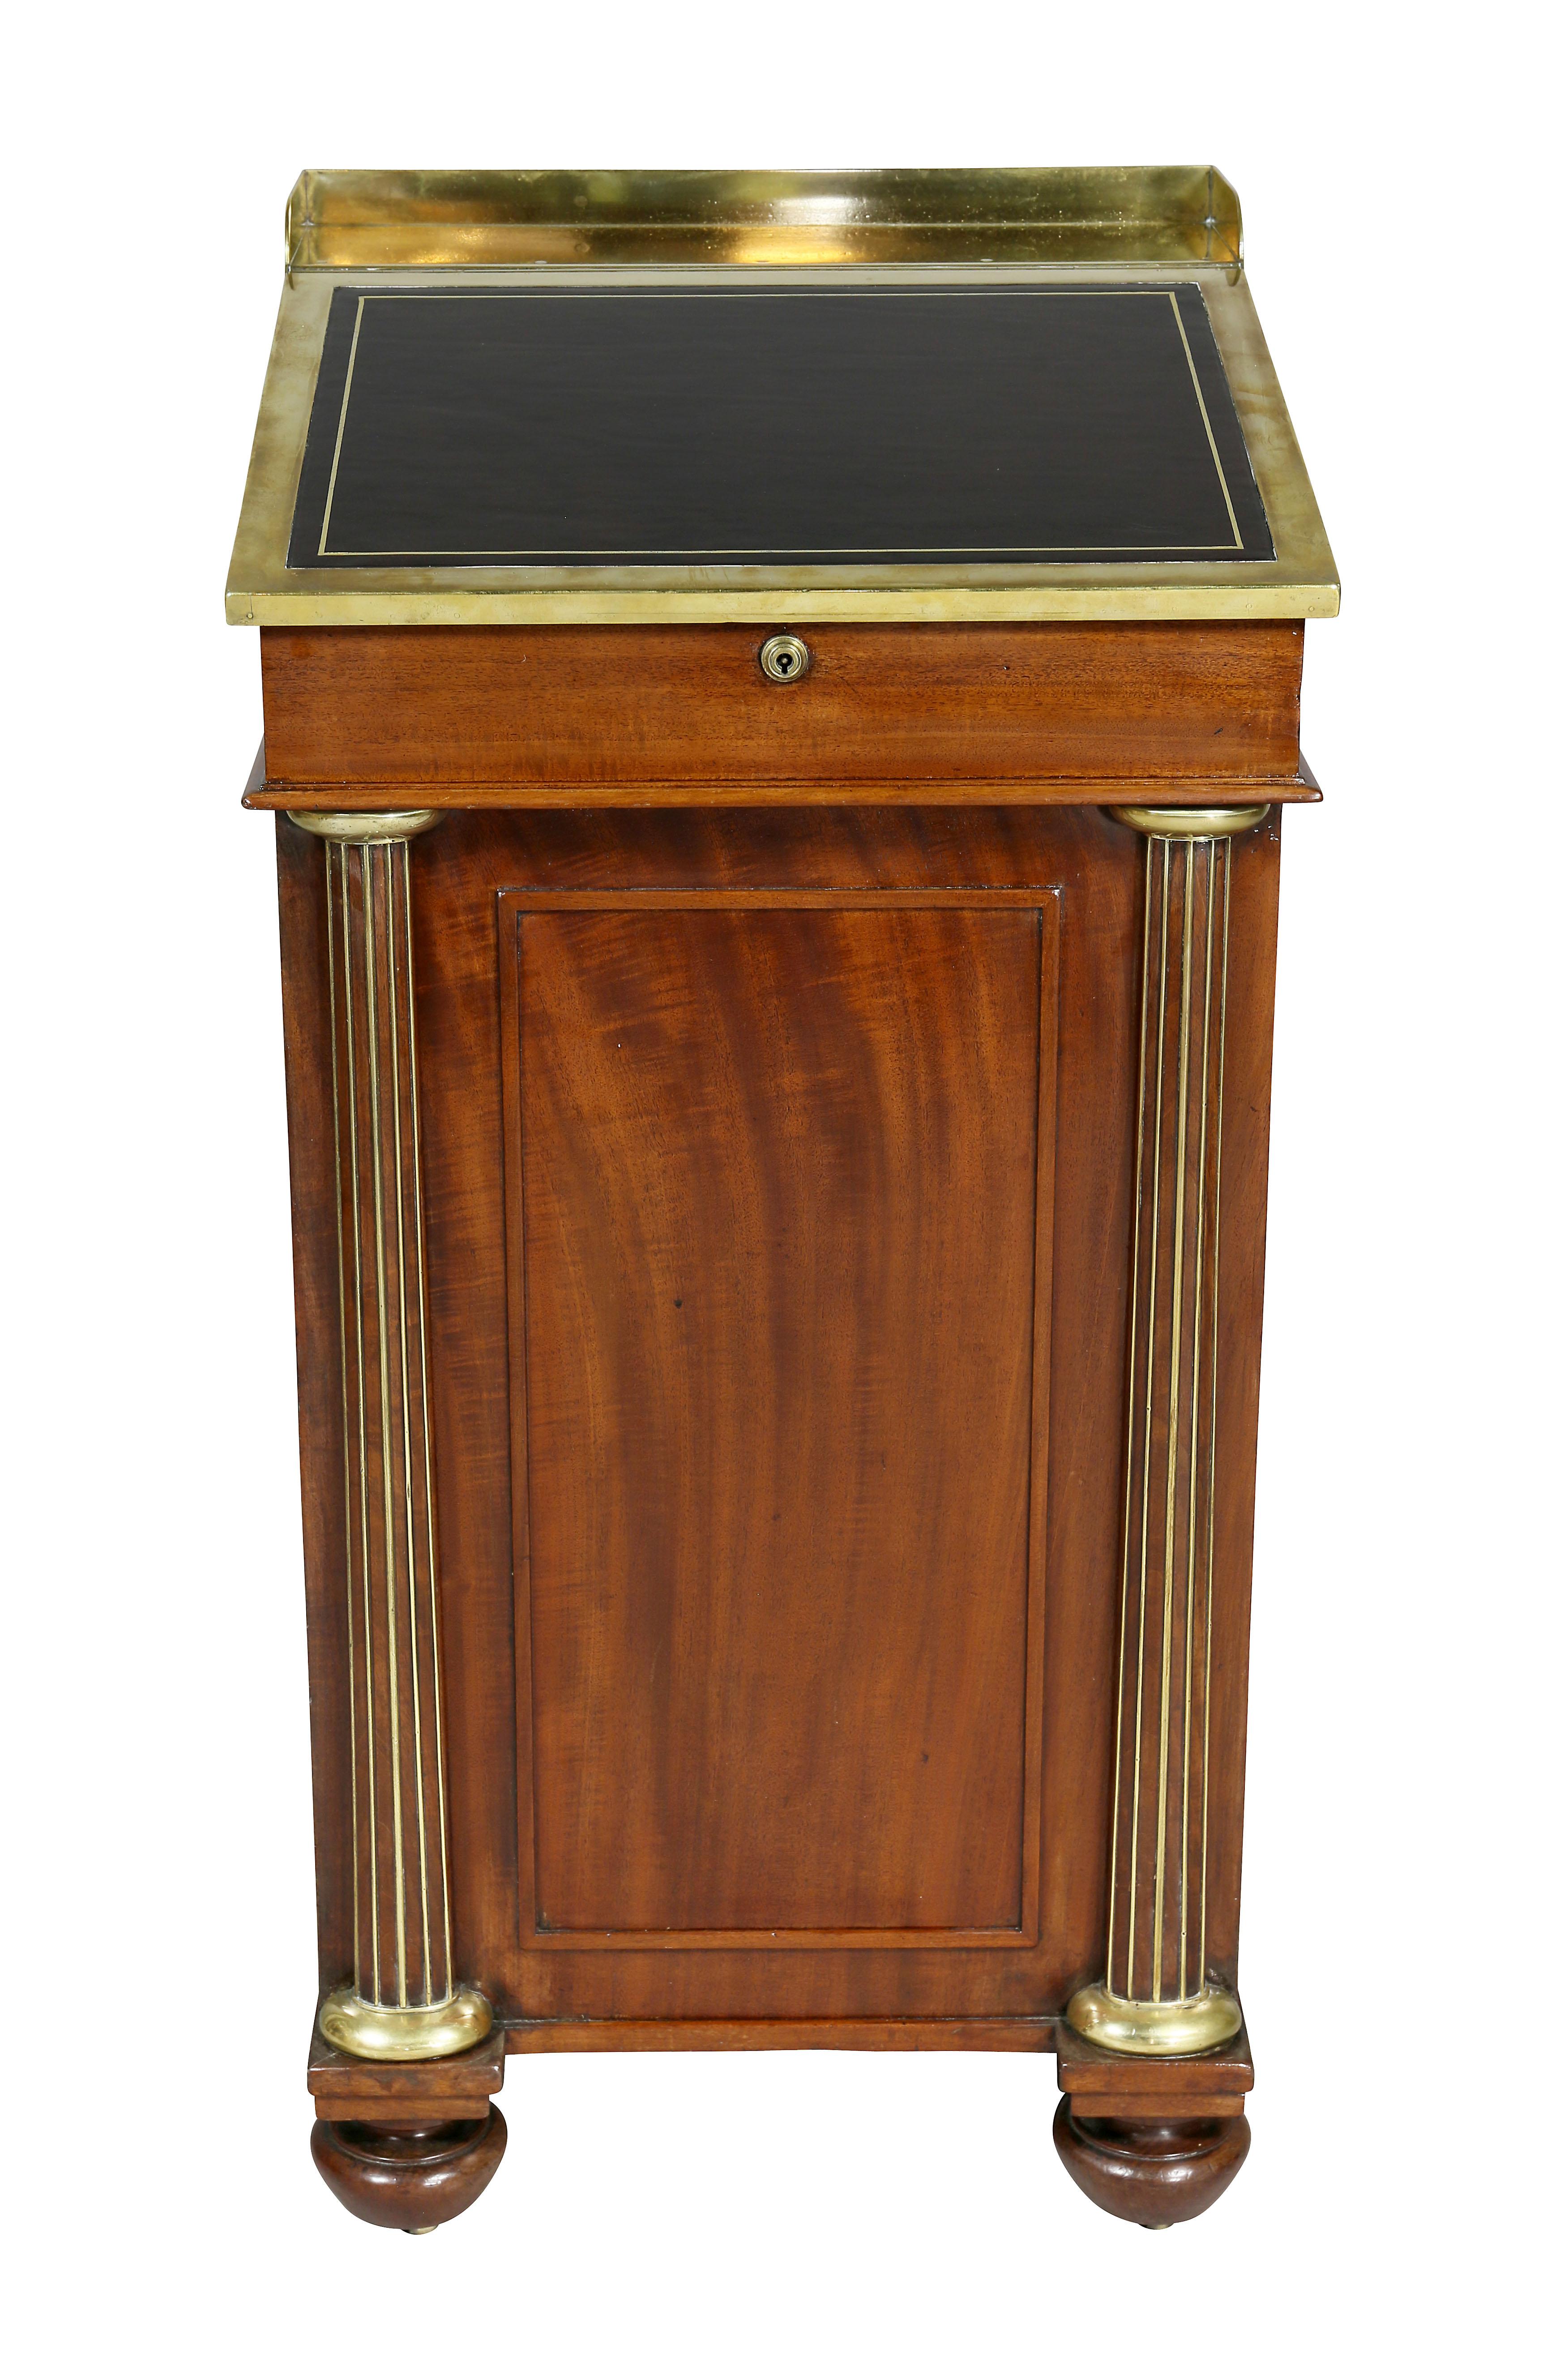 With a slant lid adjustable hinged leather writing surface with interior, over real and opposing false drawers and brass-mounted columns ending on bun feet. Keys. Provenance; Apter- Fredericks, London.